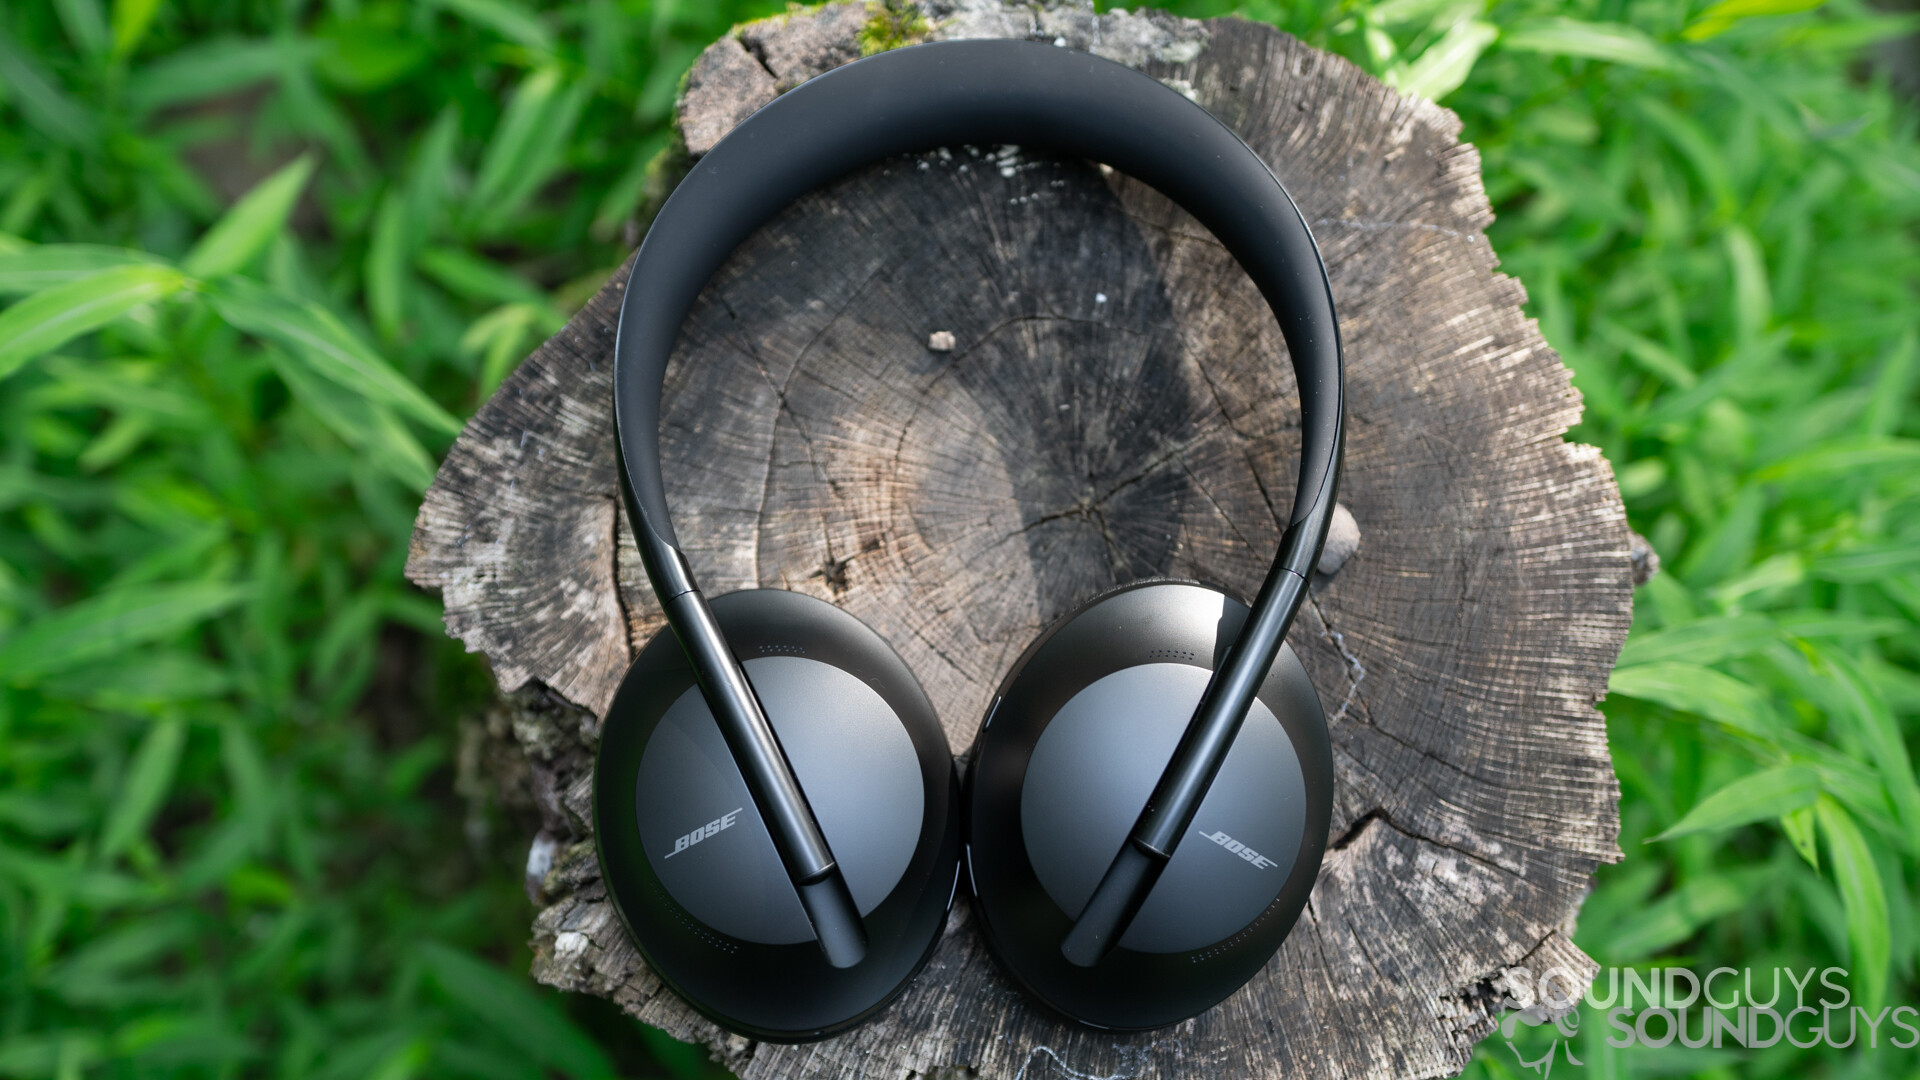 Bose Noise Cancelling Headphones 700 sitting on a tree stump surrounded by grass outside.